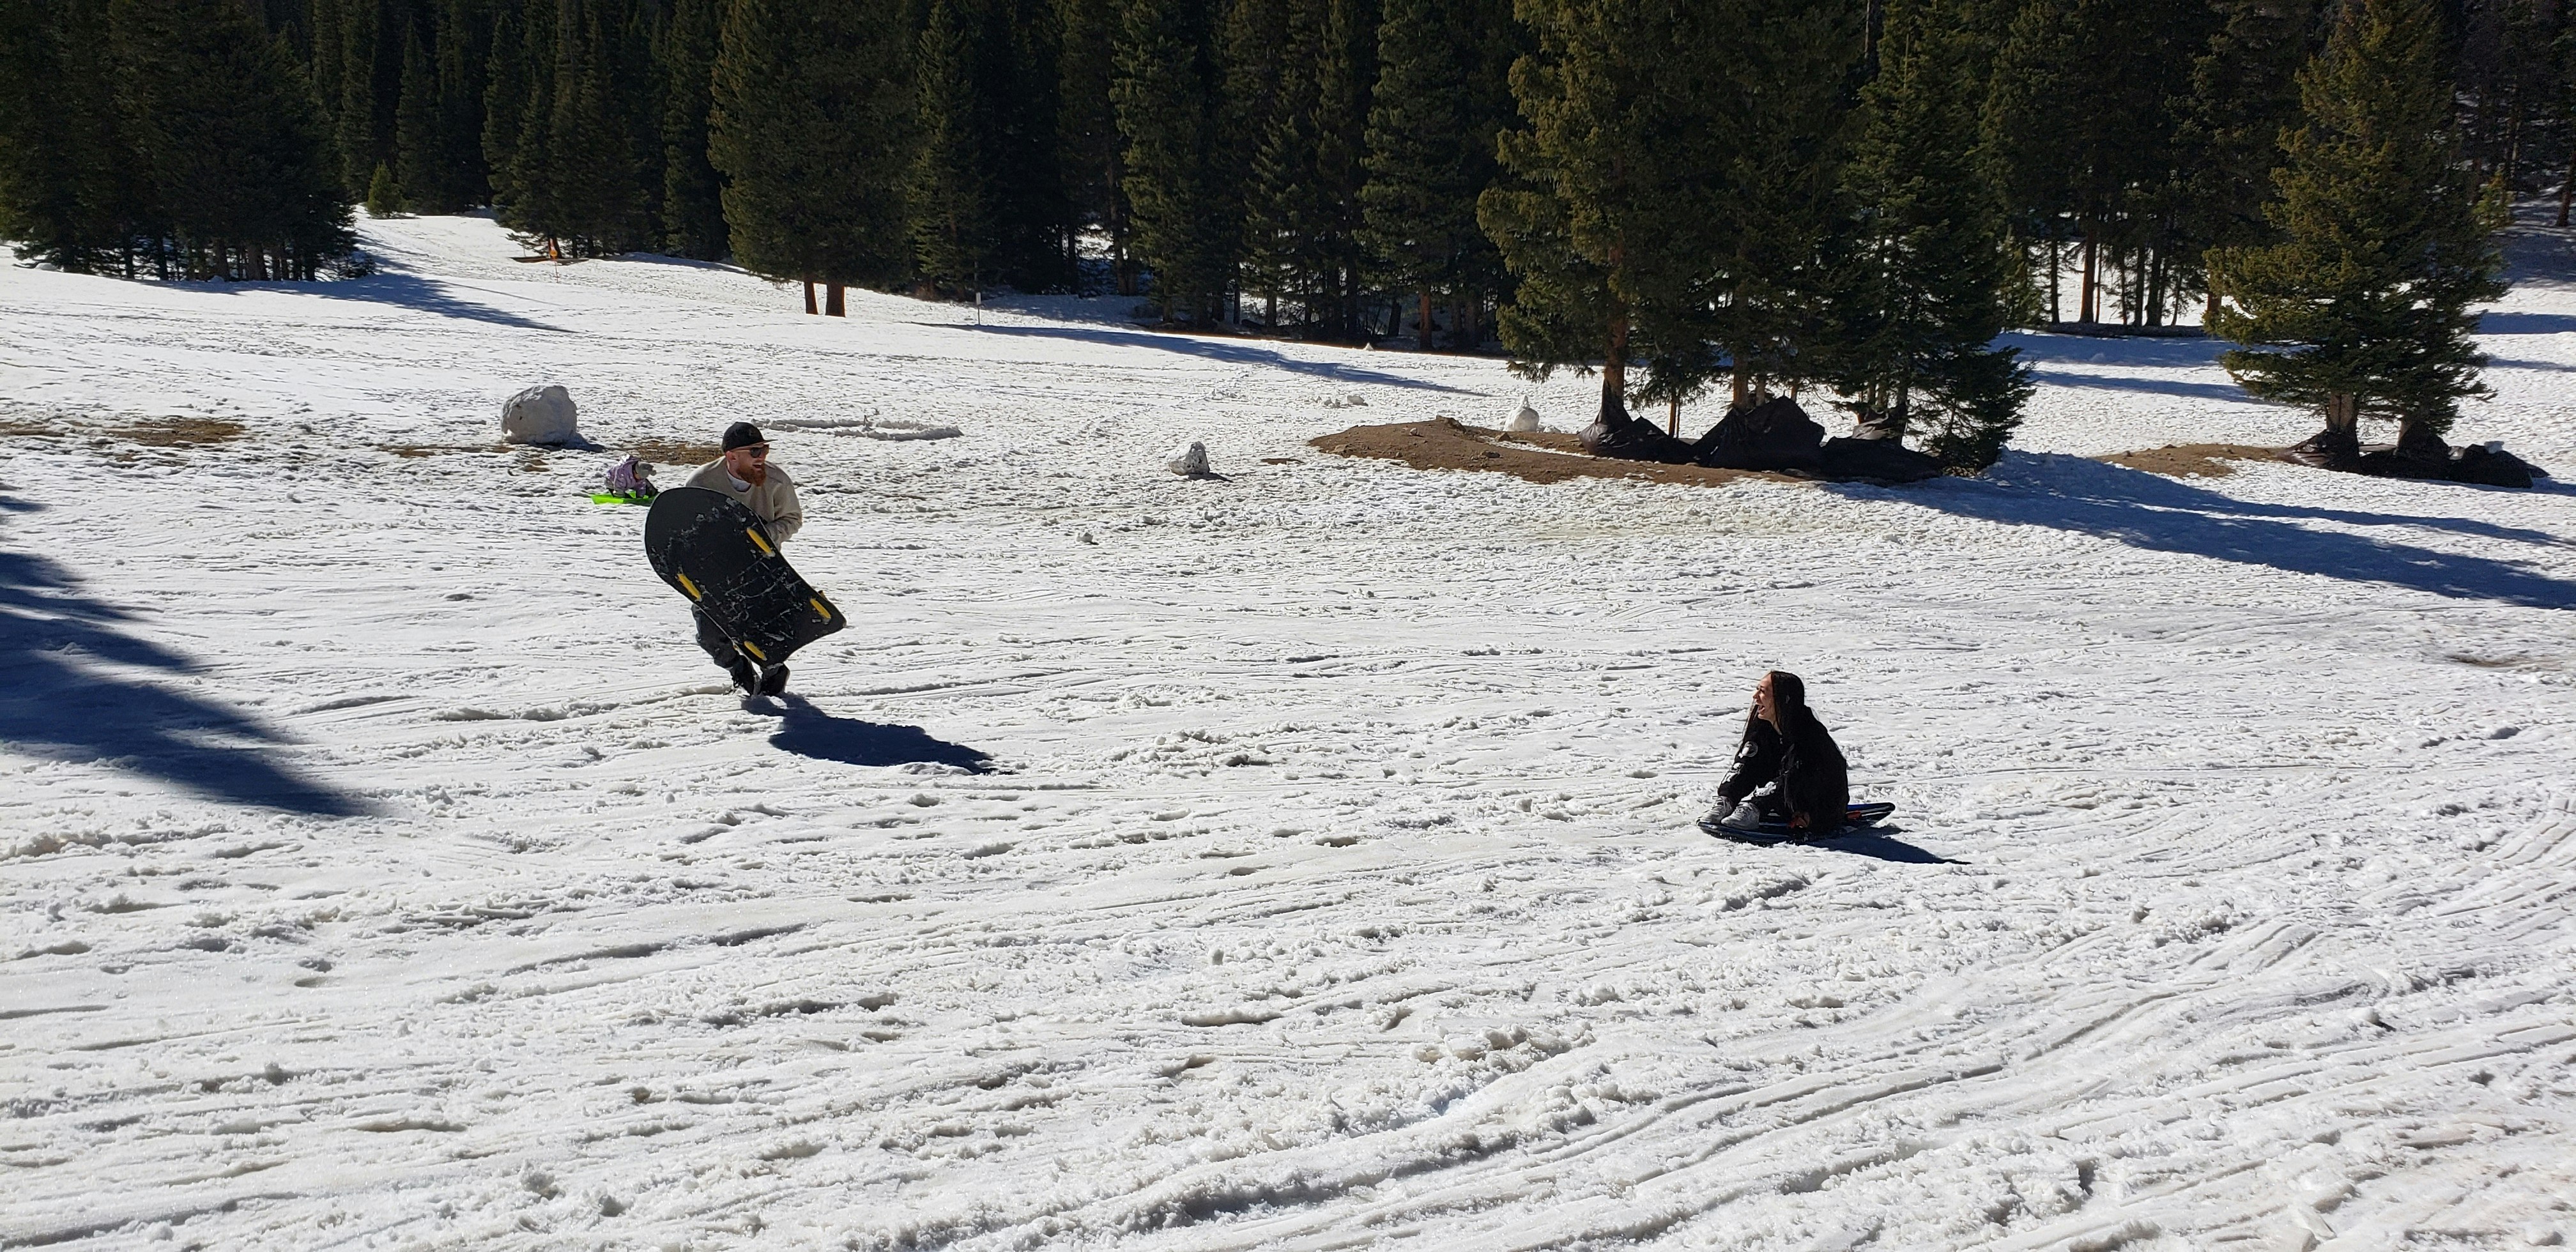 Even adults have fun on the sledding and tube run at Hidden Valley